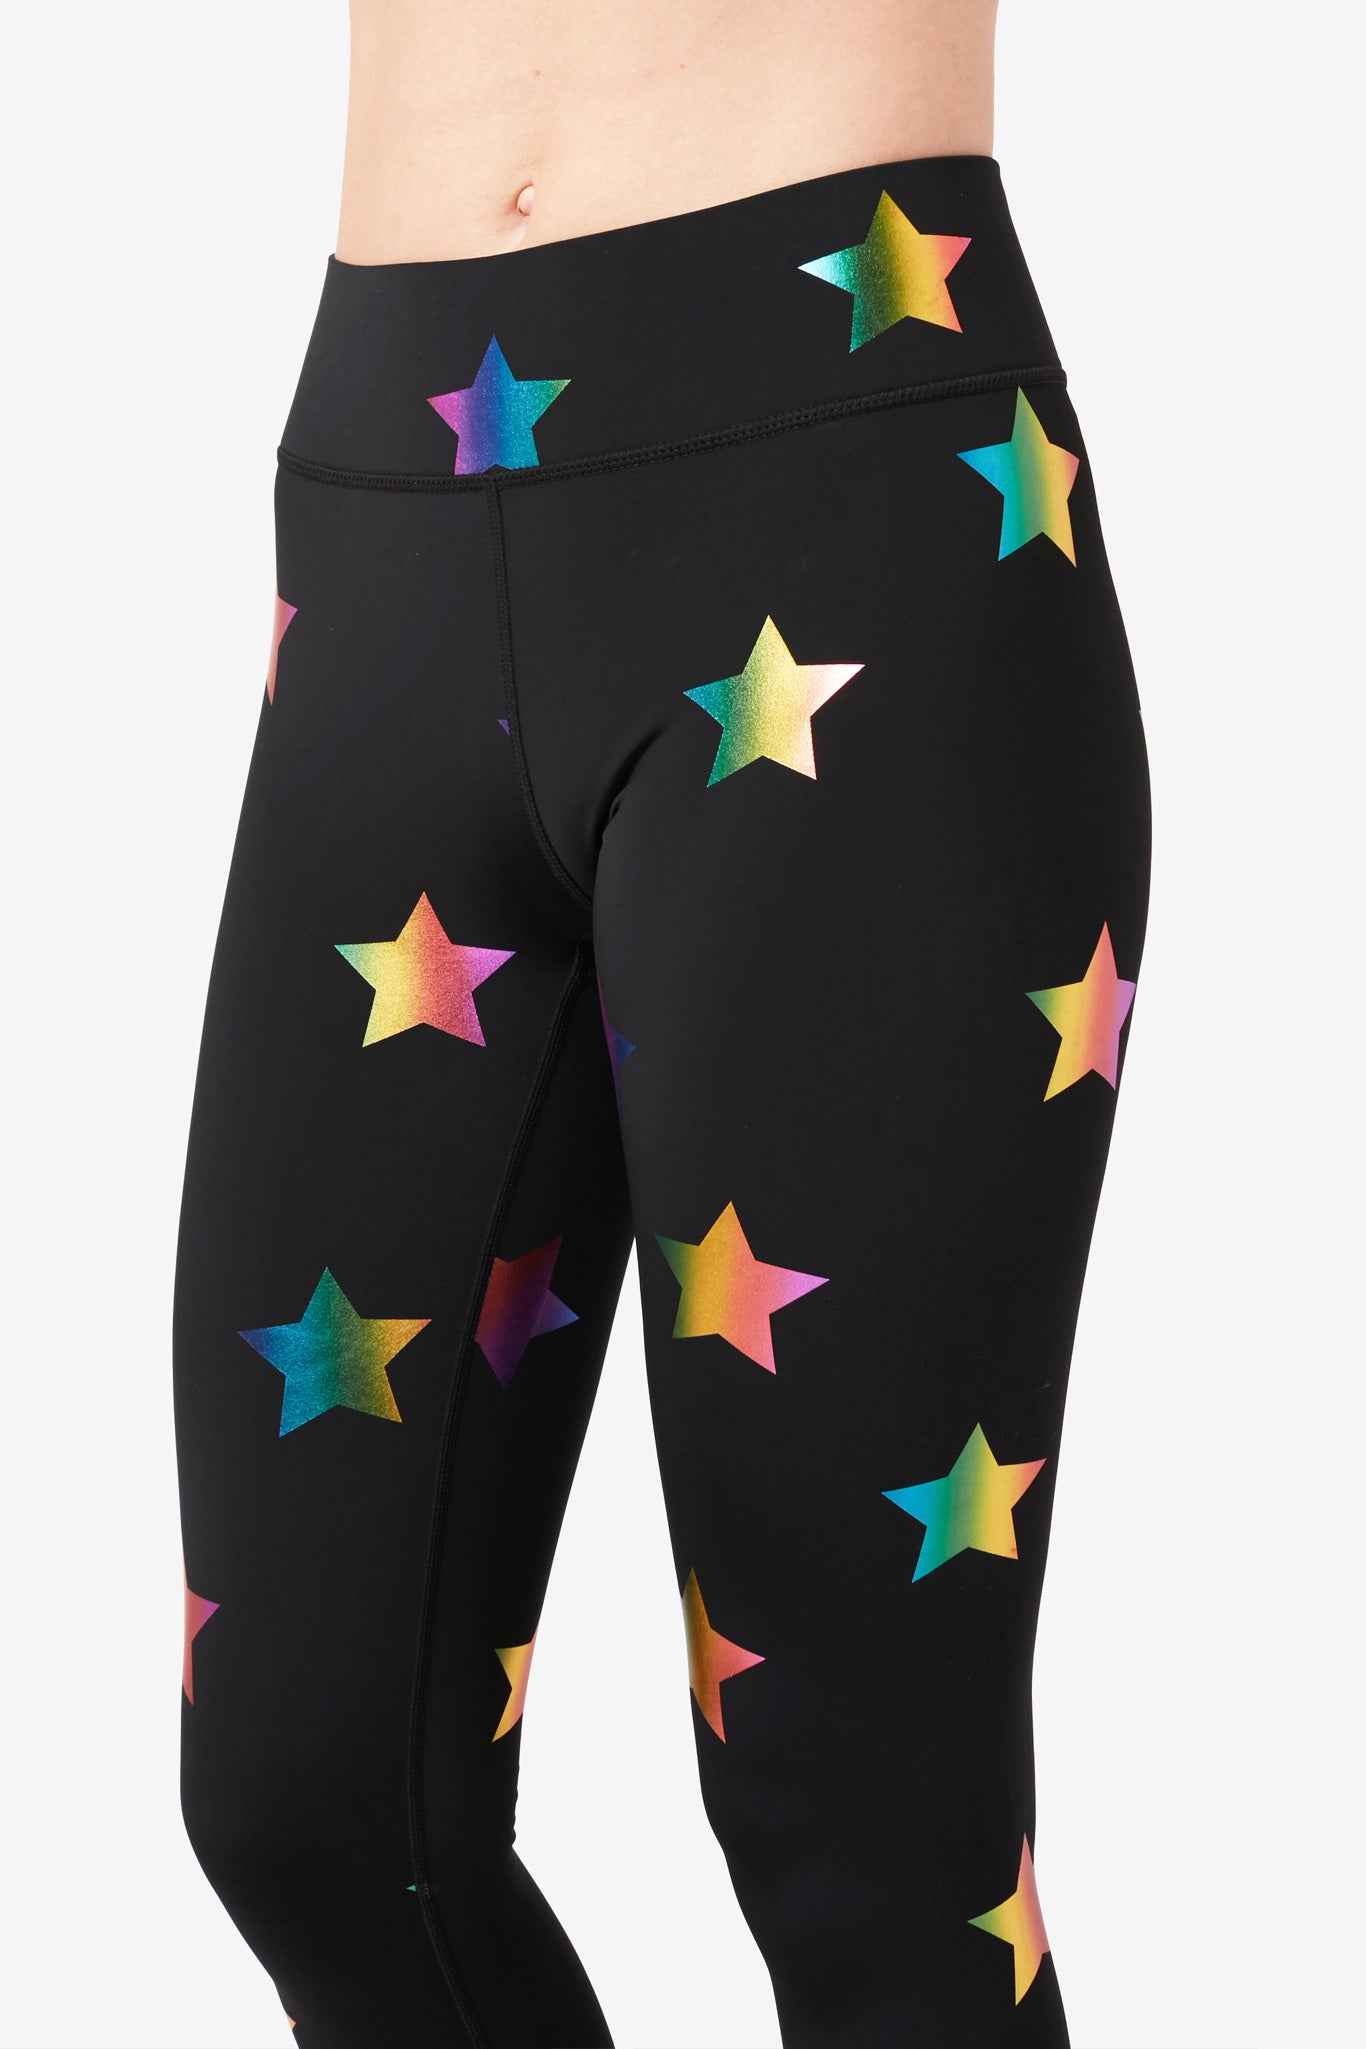 UpLift Leggings in Black Rainbow Star Foil with Tall Band